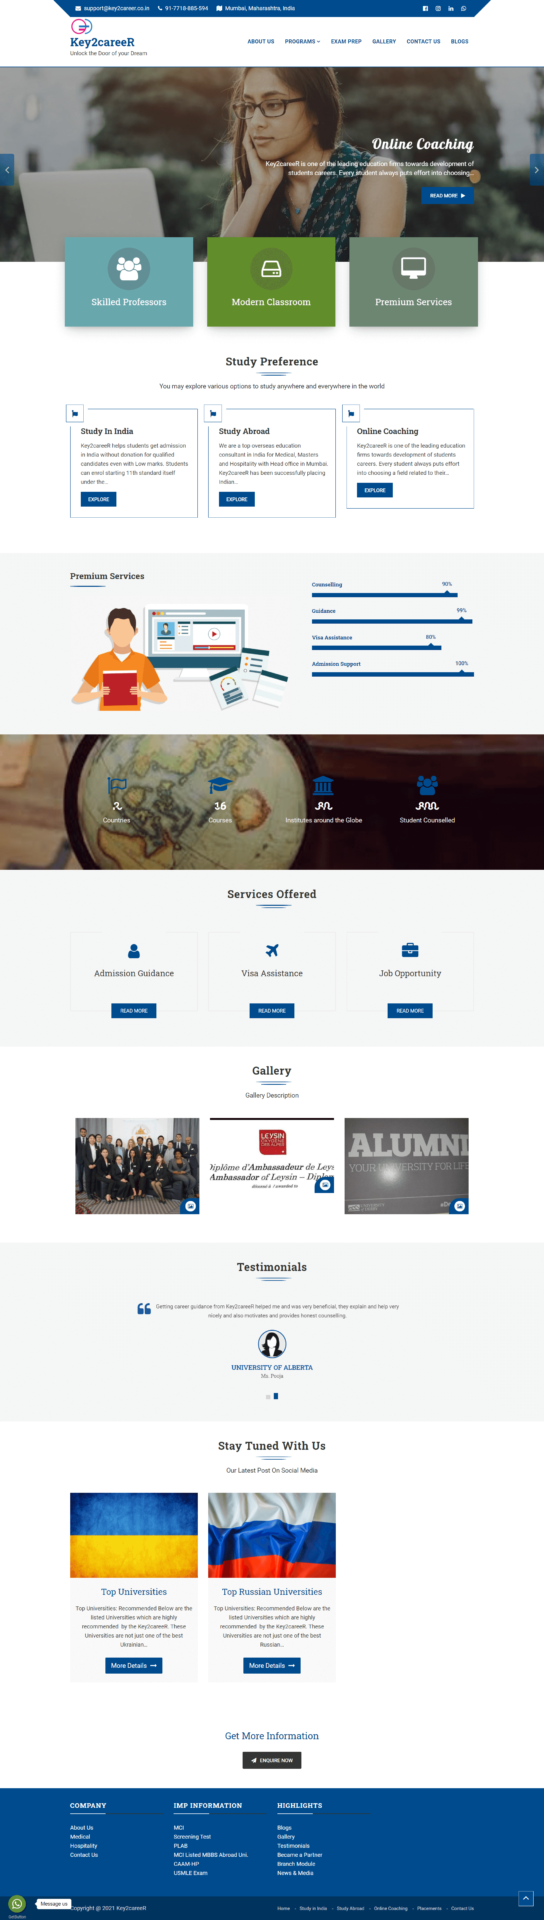 Key2careeR-Website-Homepage-Made-by-The-WebSpot(Our-Work)